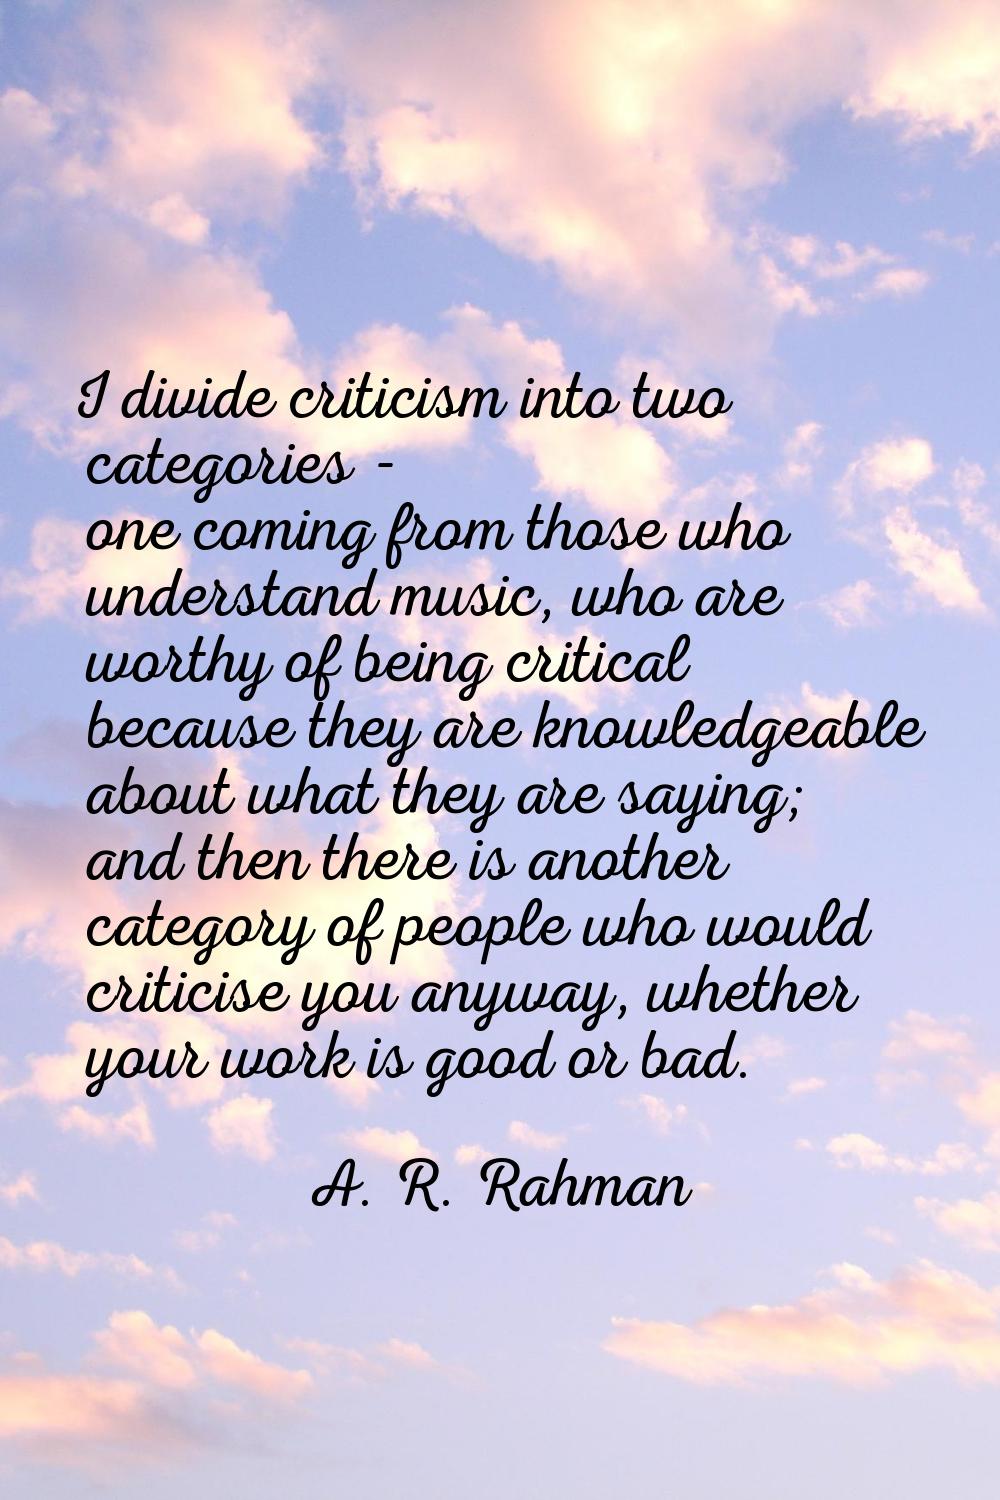 I divide criticism into two categories - one coming from those who understand music, who are worthy